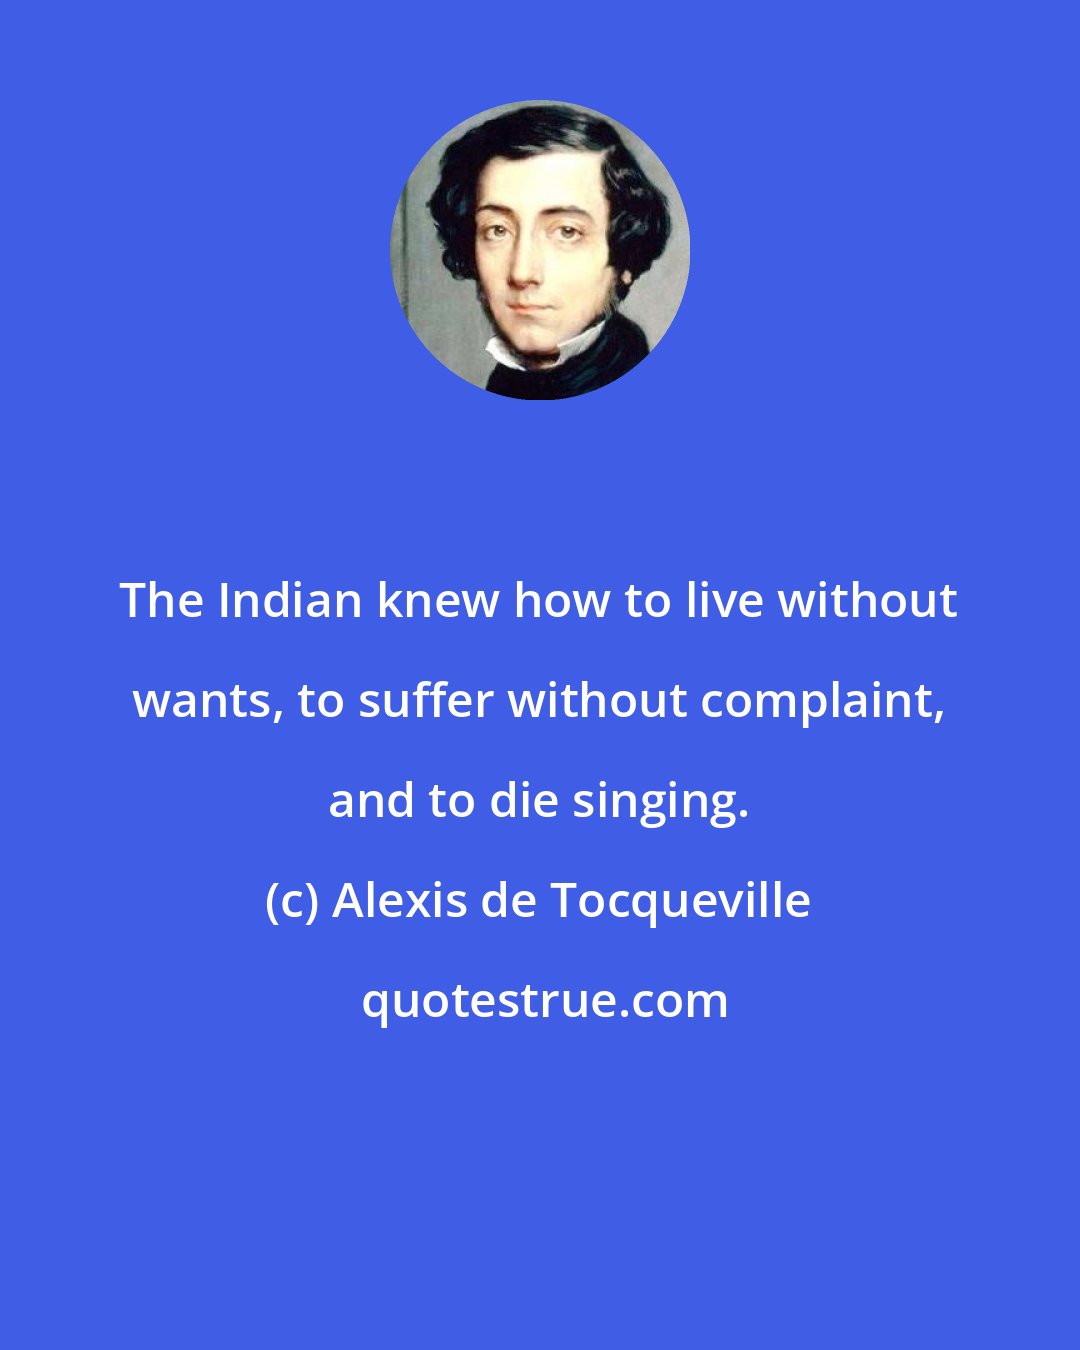 Alexis de Tocqueville: The Indian knew how to live without wants, to suffer without complaint, and to die singing.